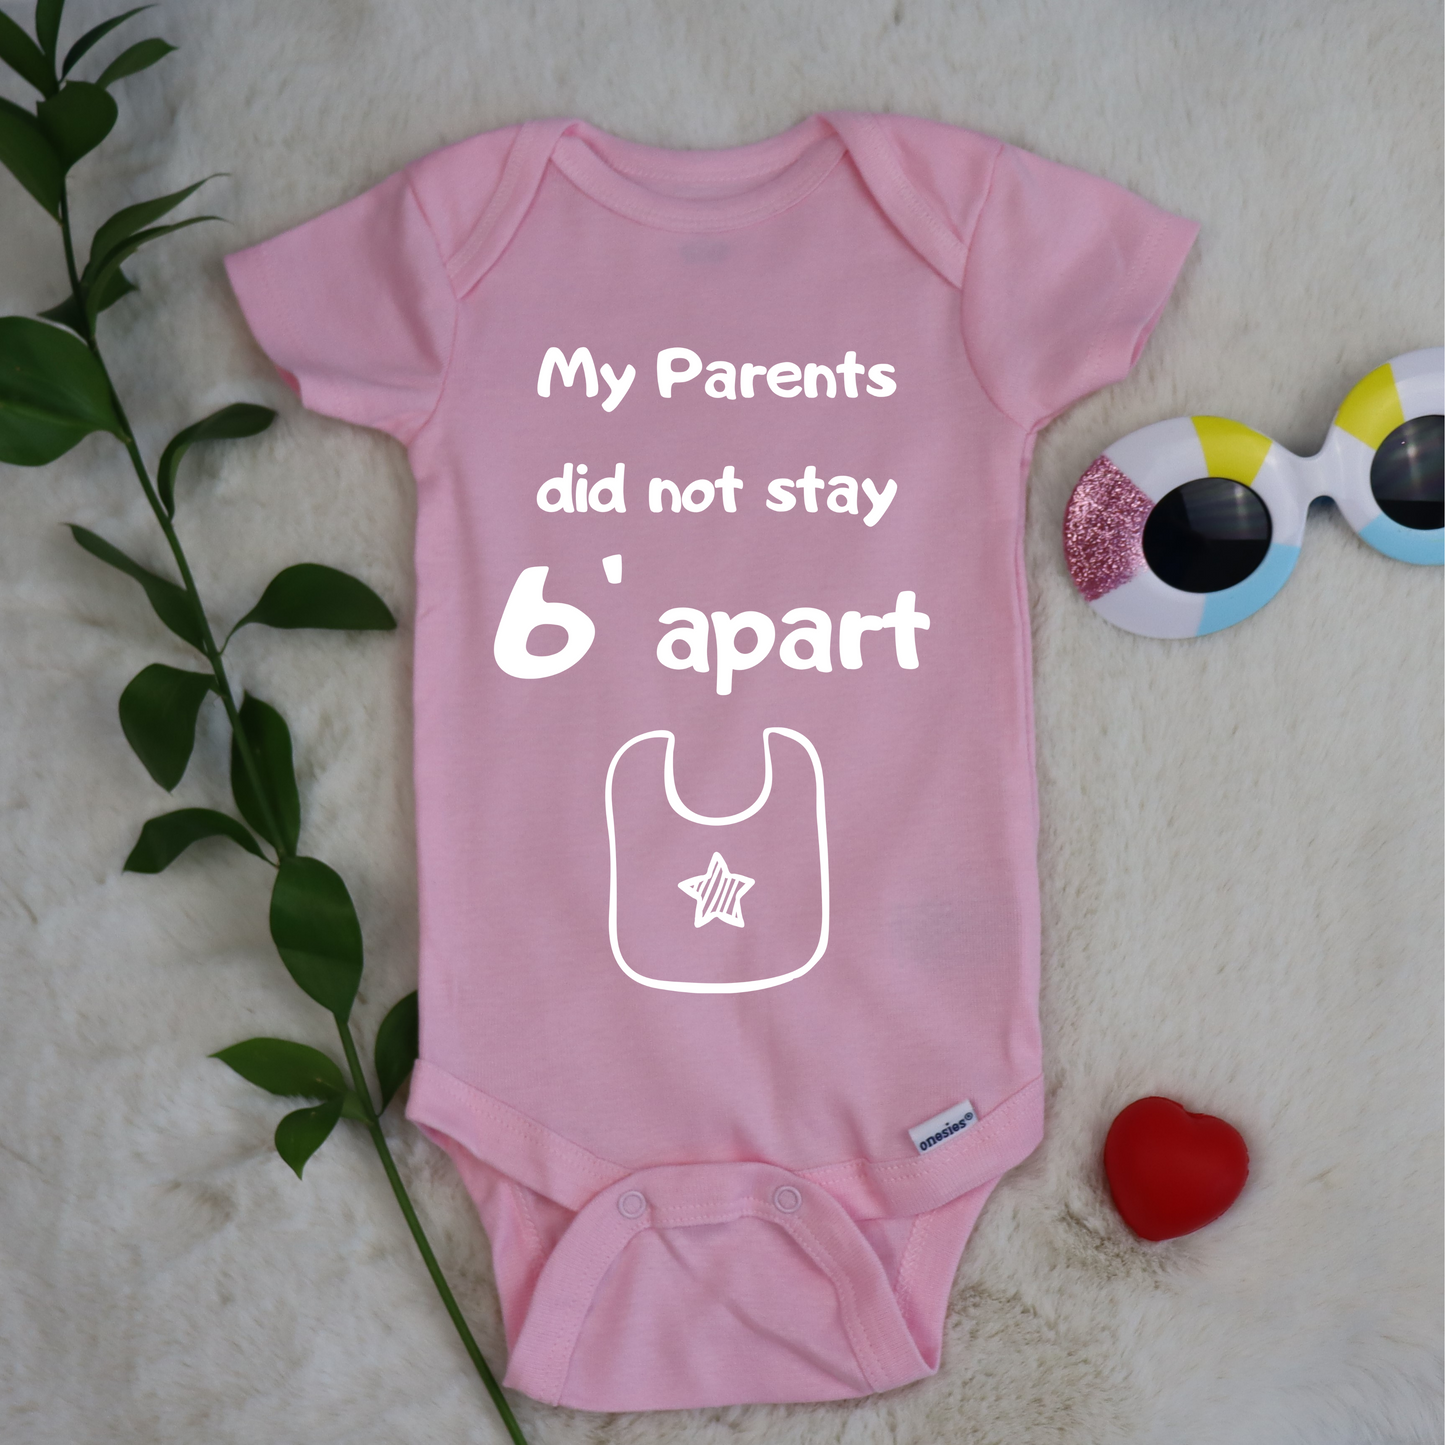 My Parents Did not Stay 6 ft Apart Baby Onesie